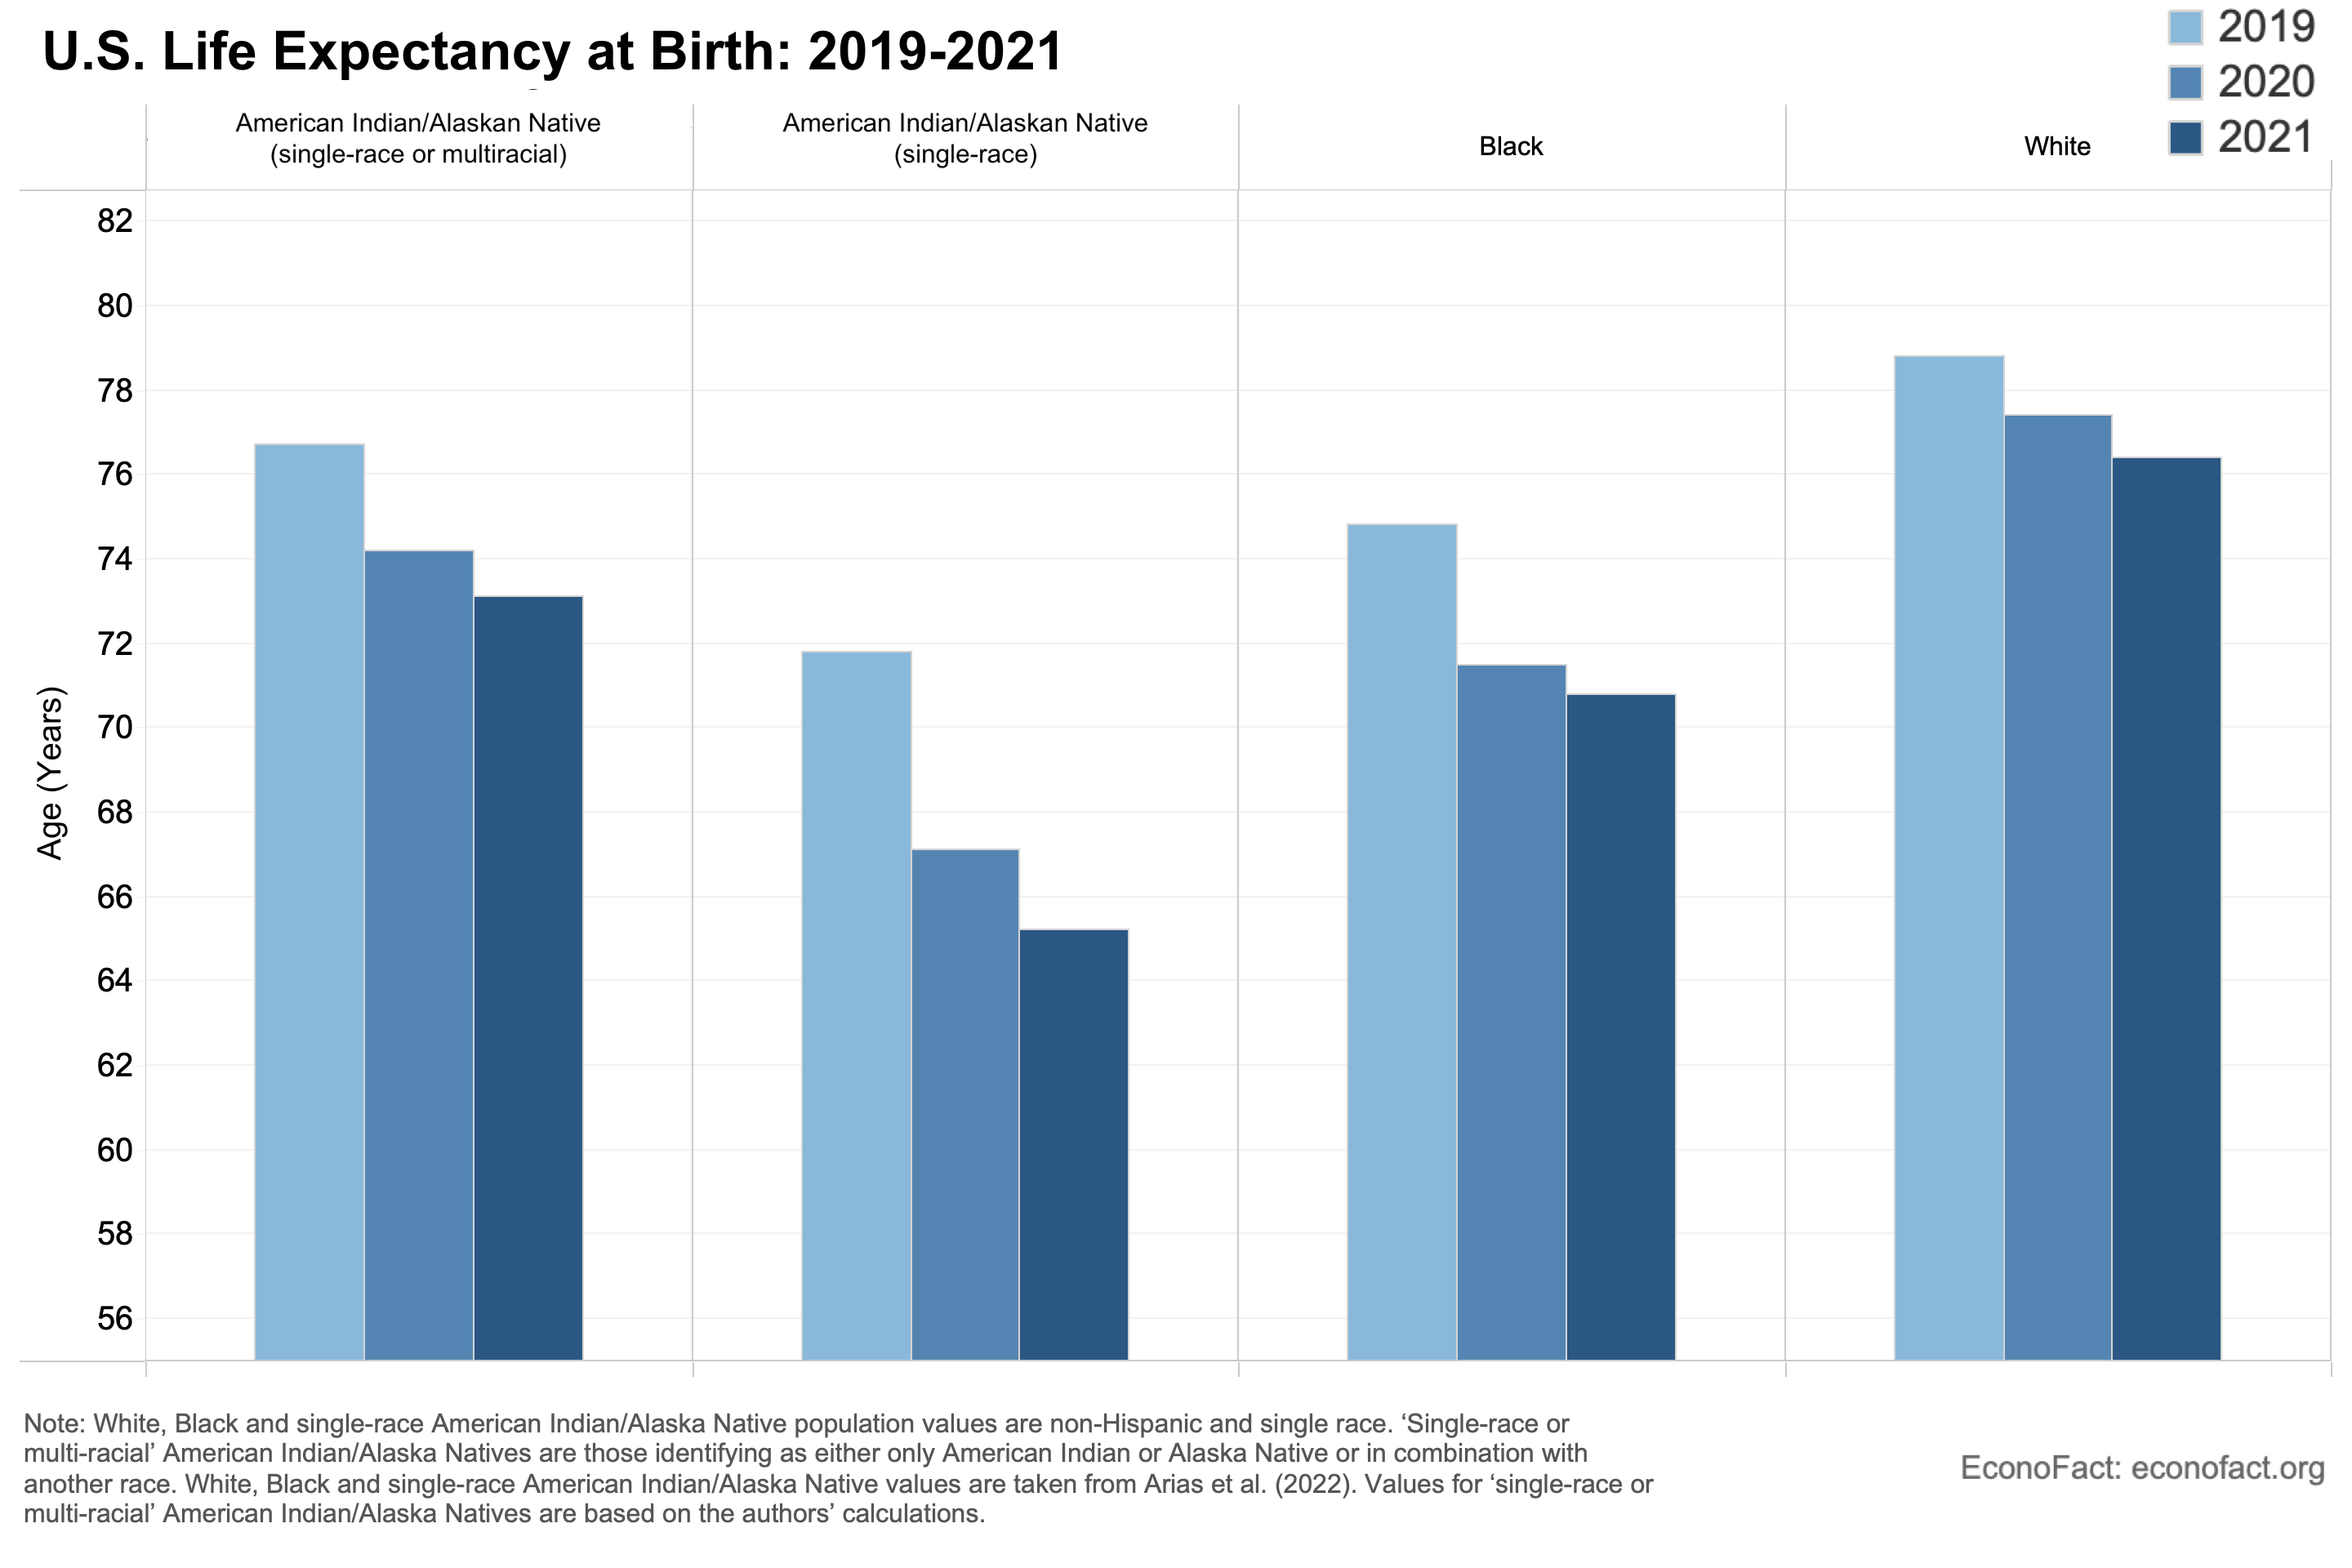 How Much Did Native American Life Expectancy Drop During COVID-19?